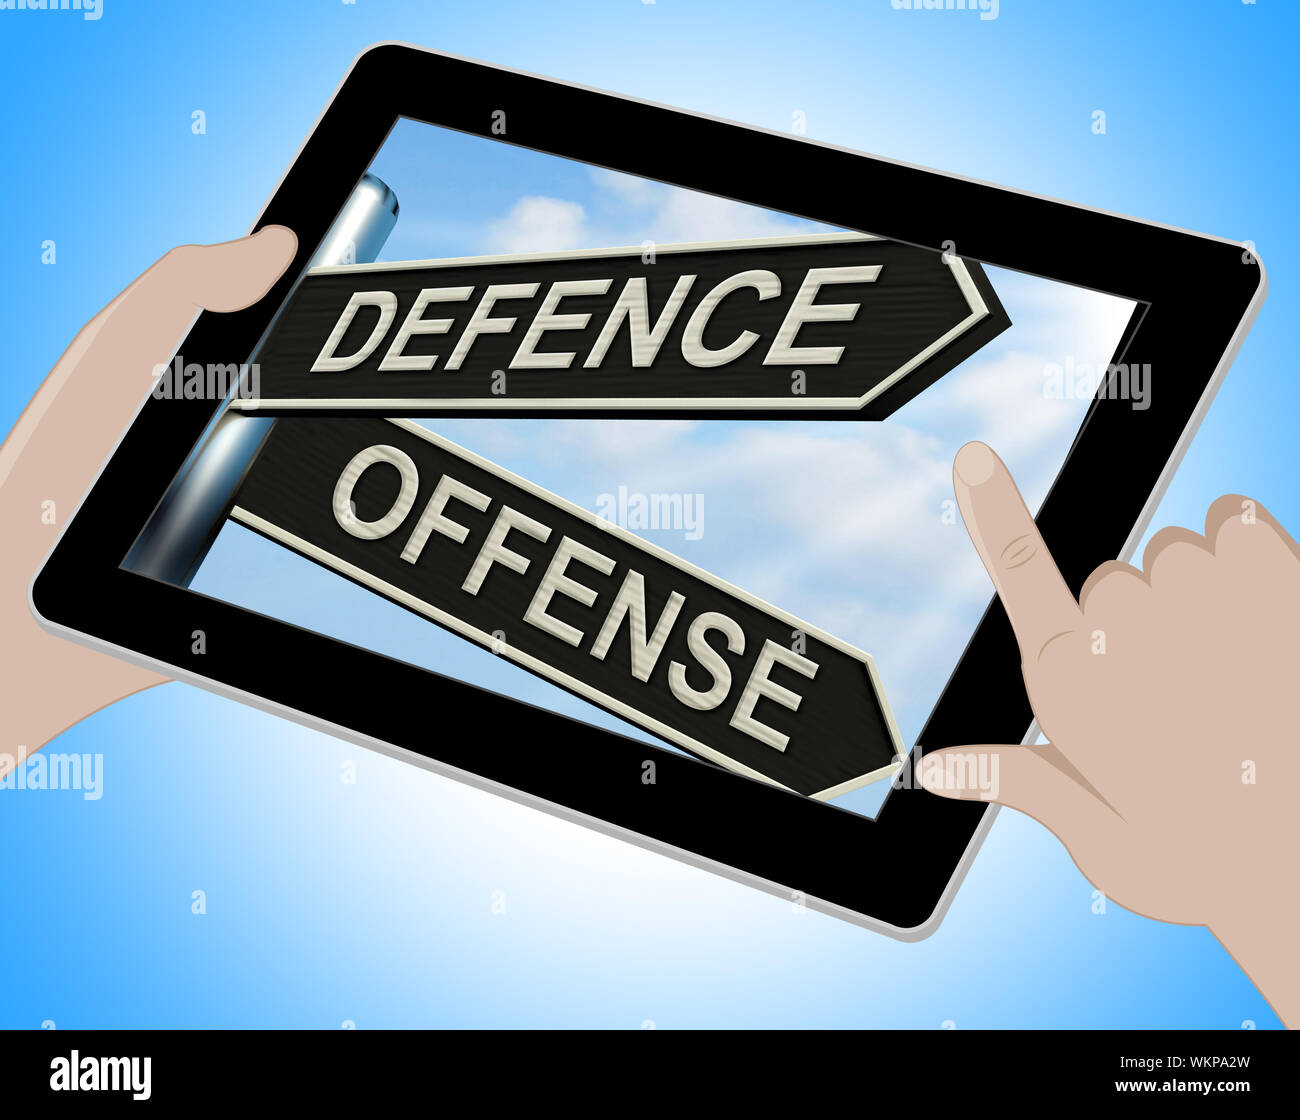 Defence Offense Tablet Showing Defending And Tactics Stock Photo